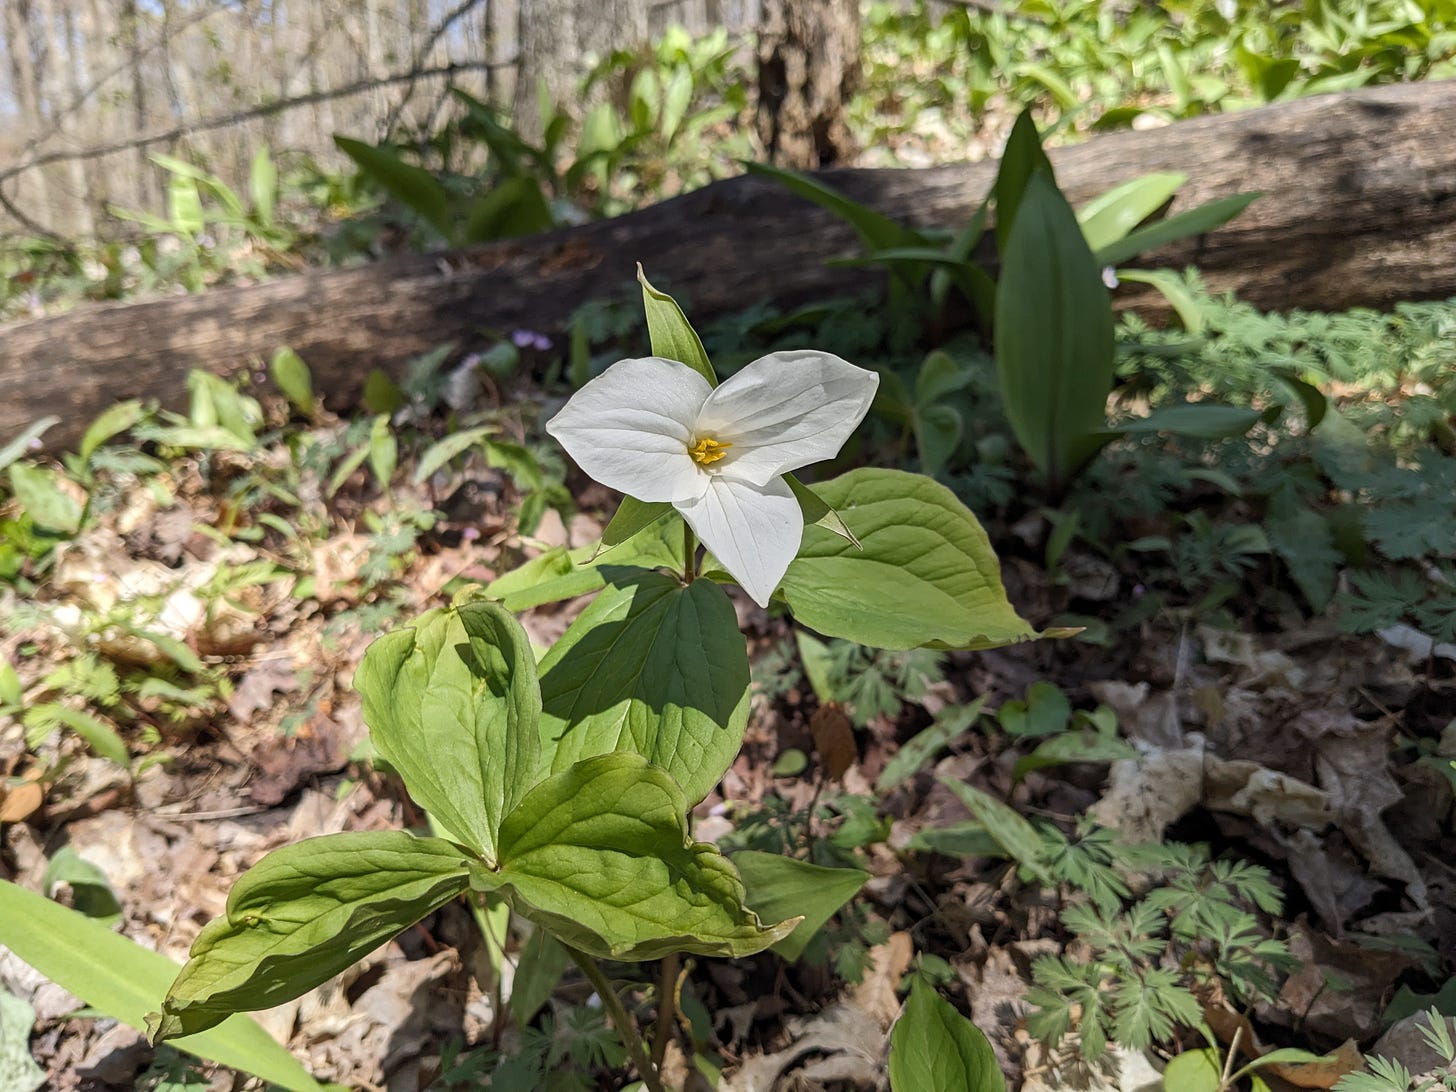 Photo of a woodland floor, with a white trillium blooming in the center. The trillium has three white petals surrounded by three green leaves.